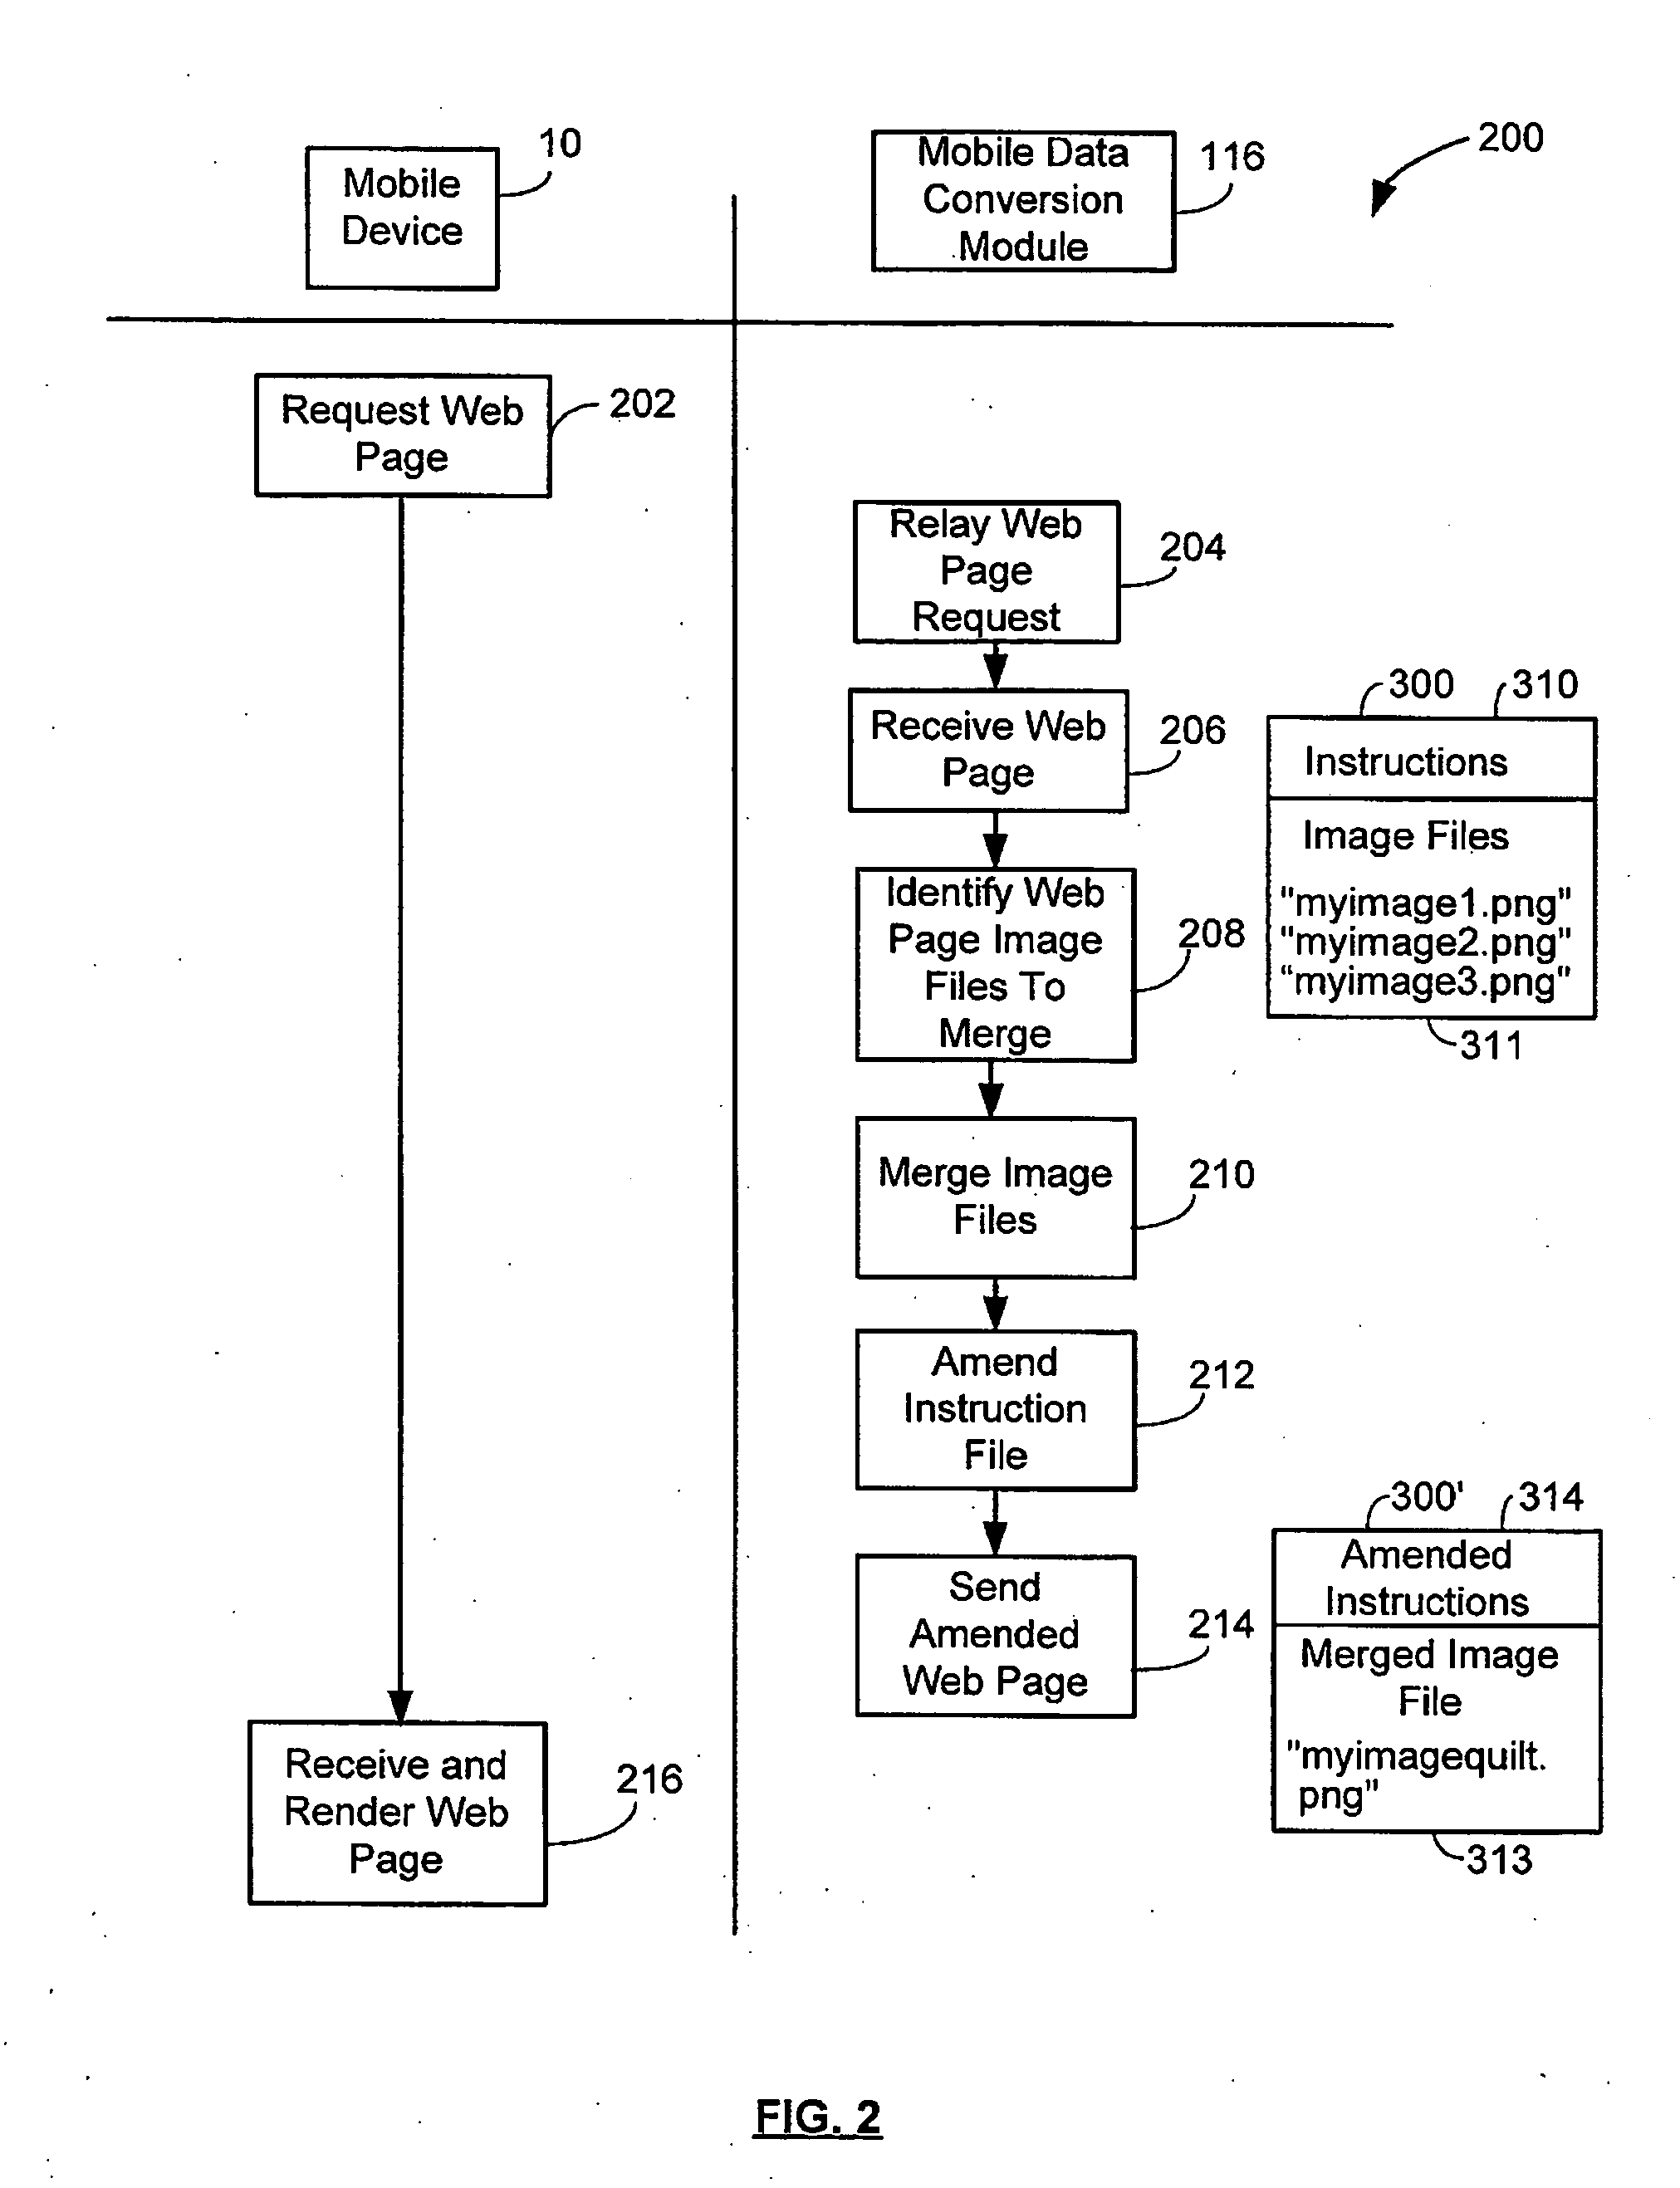 Image stitching for mobile electronic devices